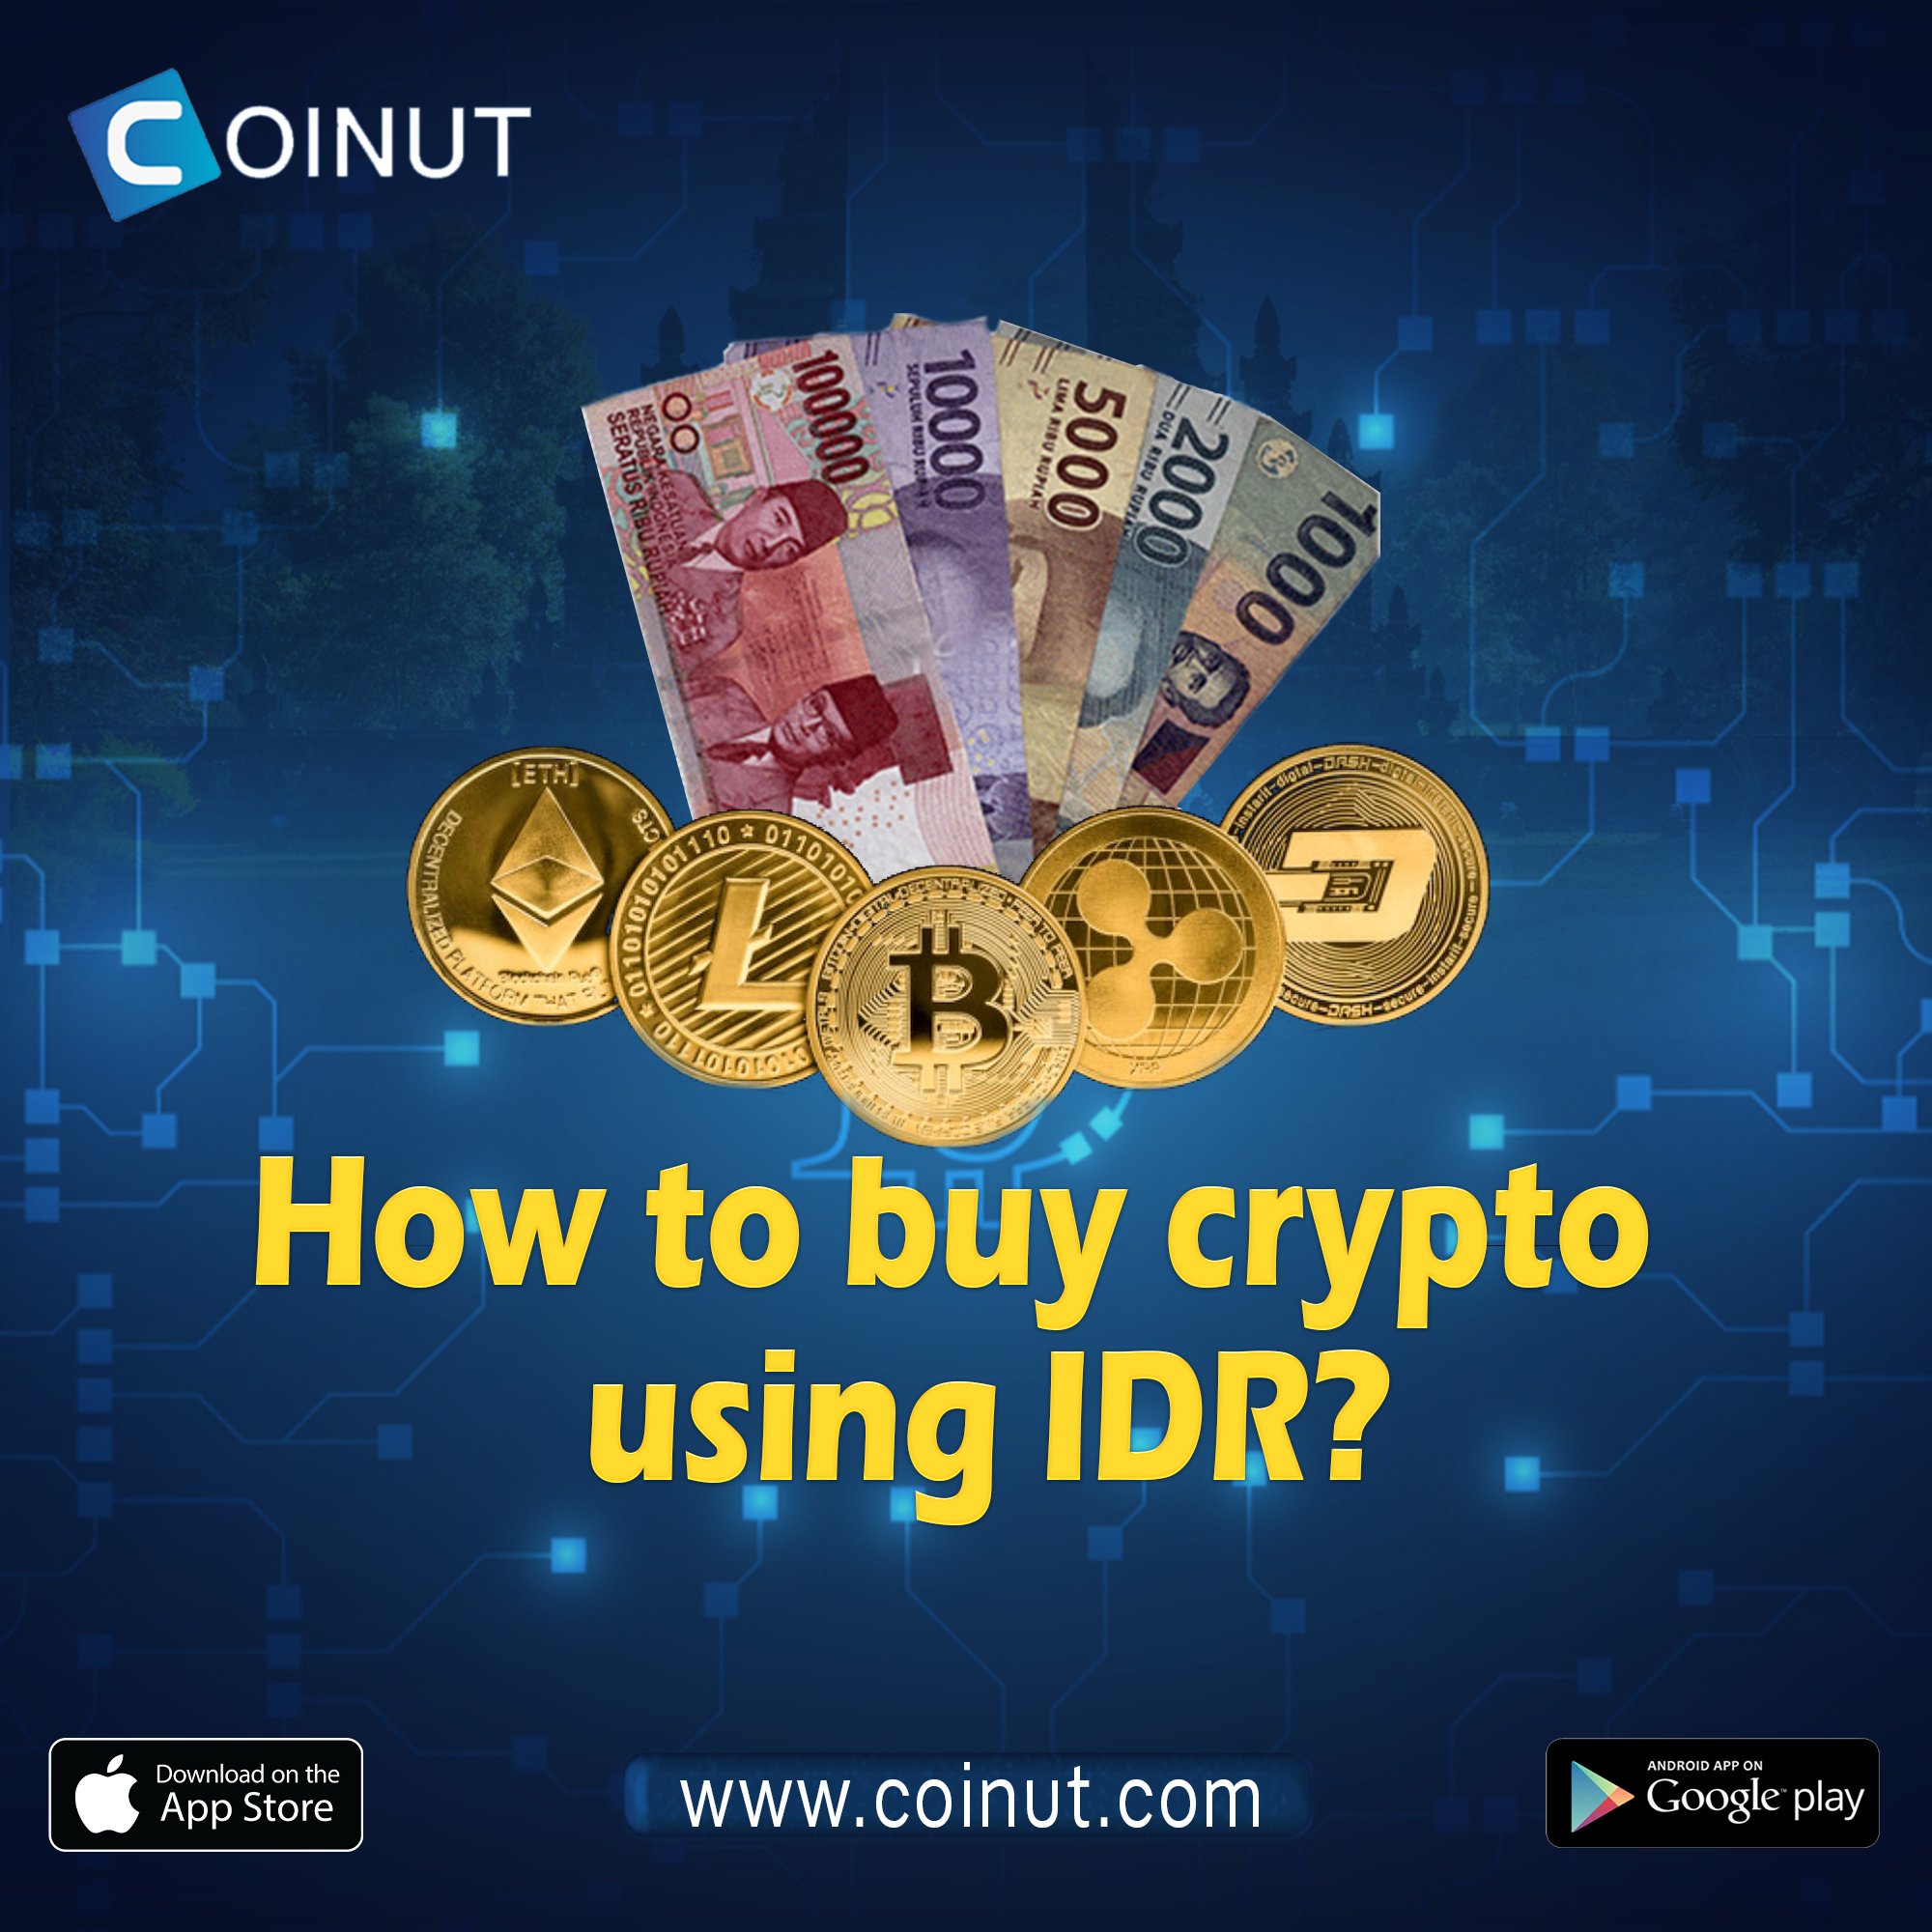 How to buy crypto using IDR?